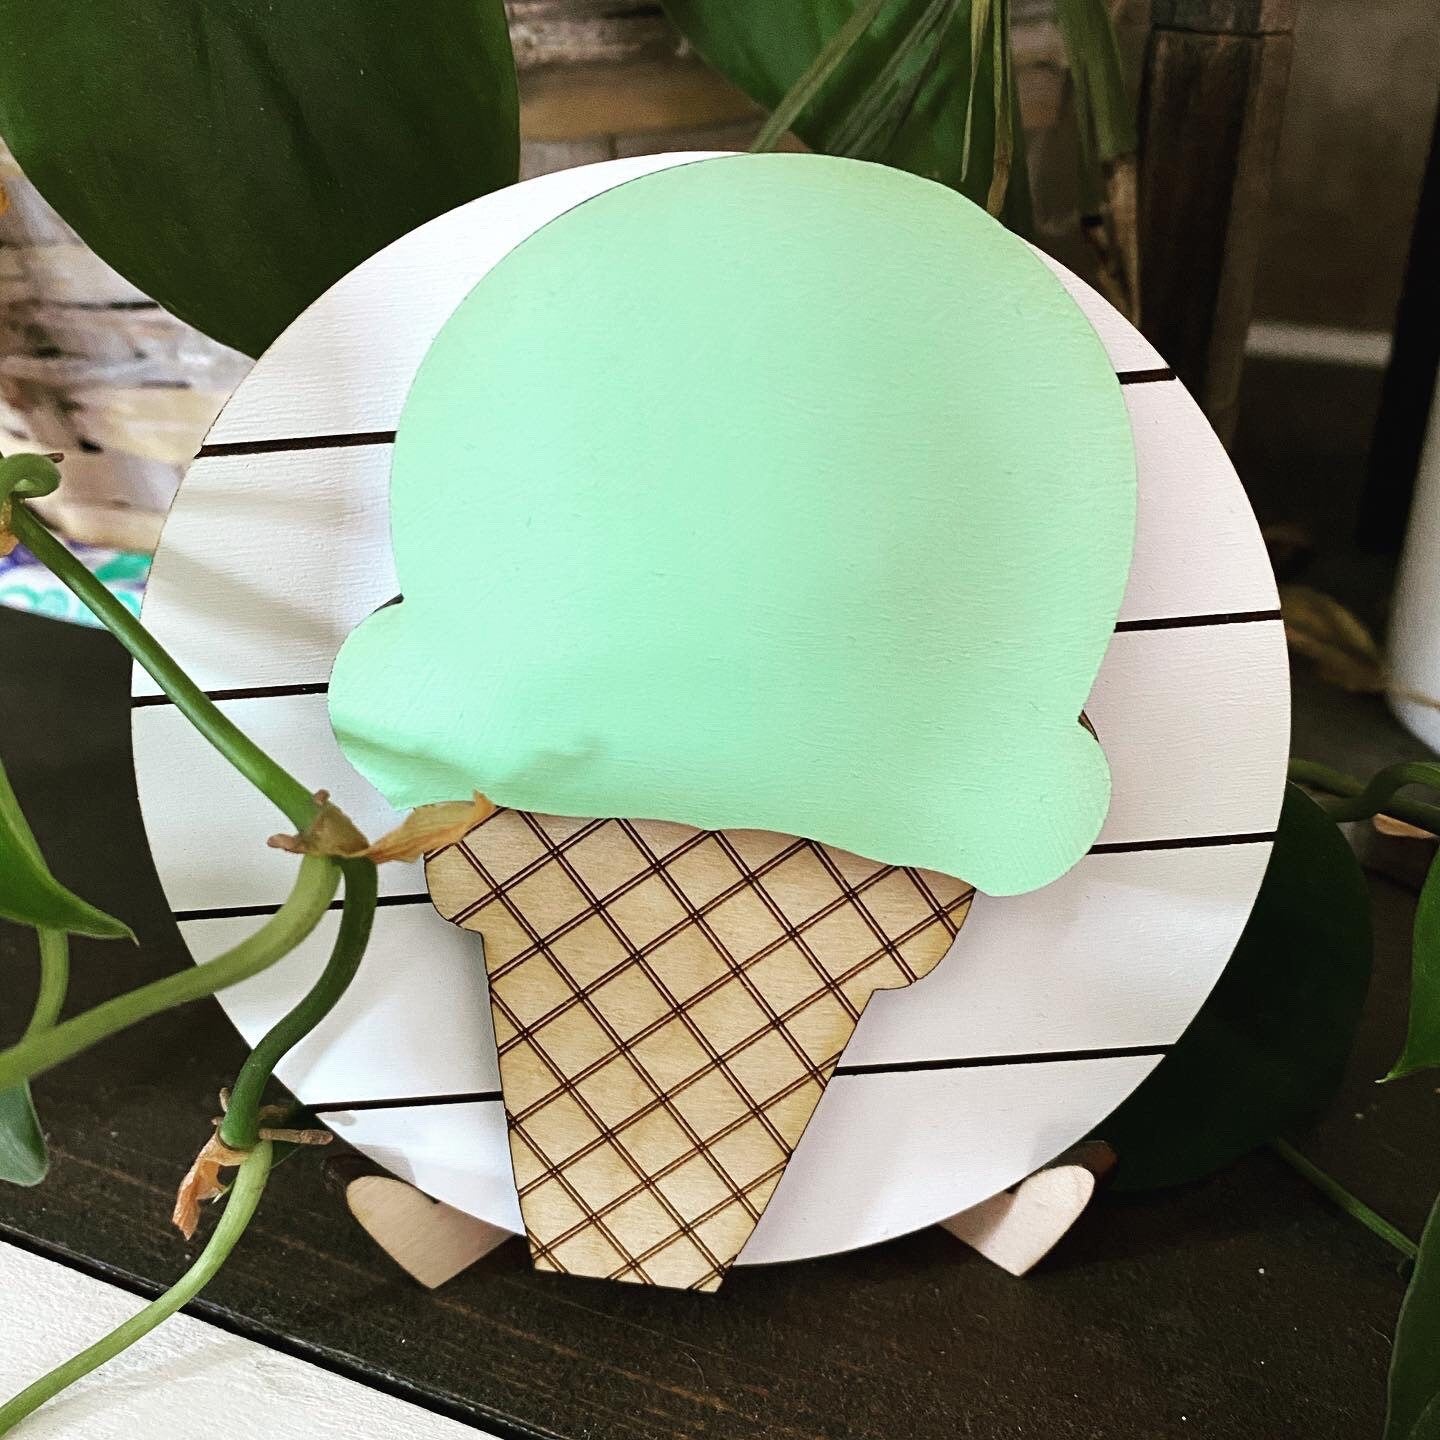 Ice Cream Cone Tiered Tray Decor, Summer Tiered Tray Decor, Ice Cream Tiered Tray Sign, 4” Round Tiered Summer Tray Sign